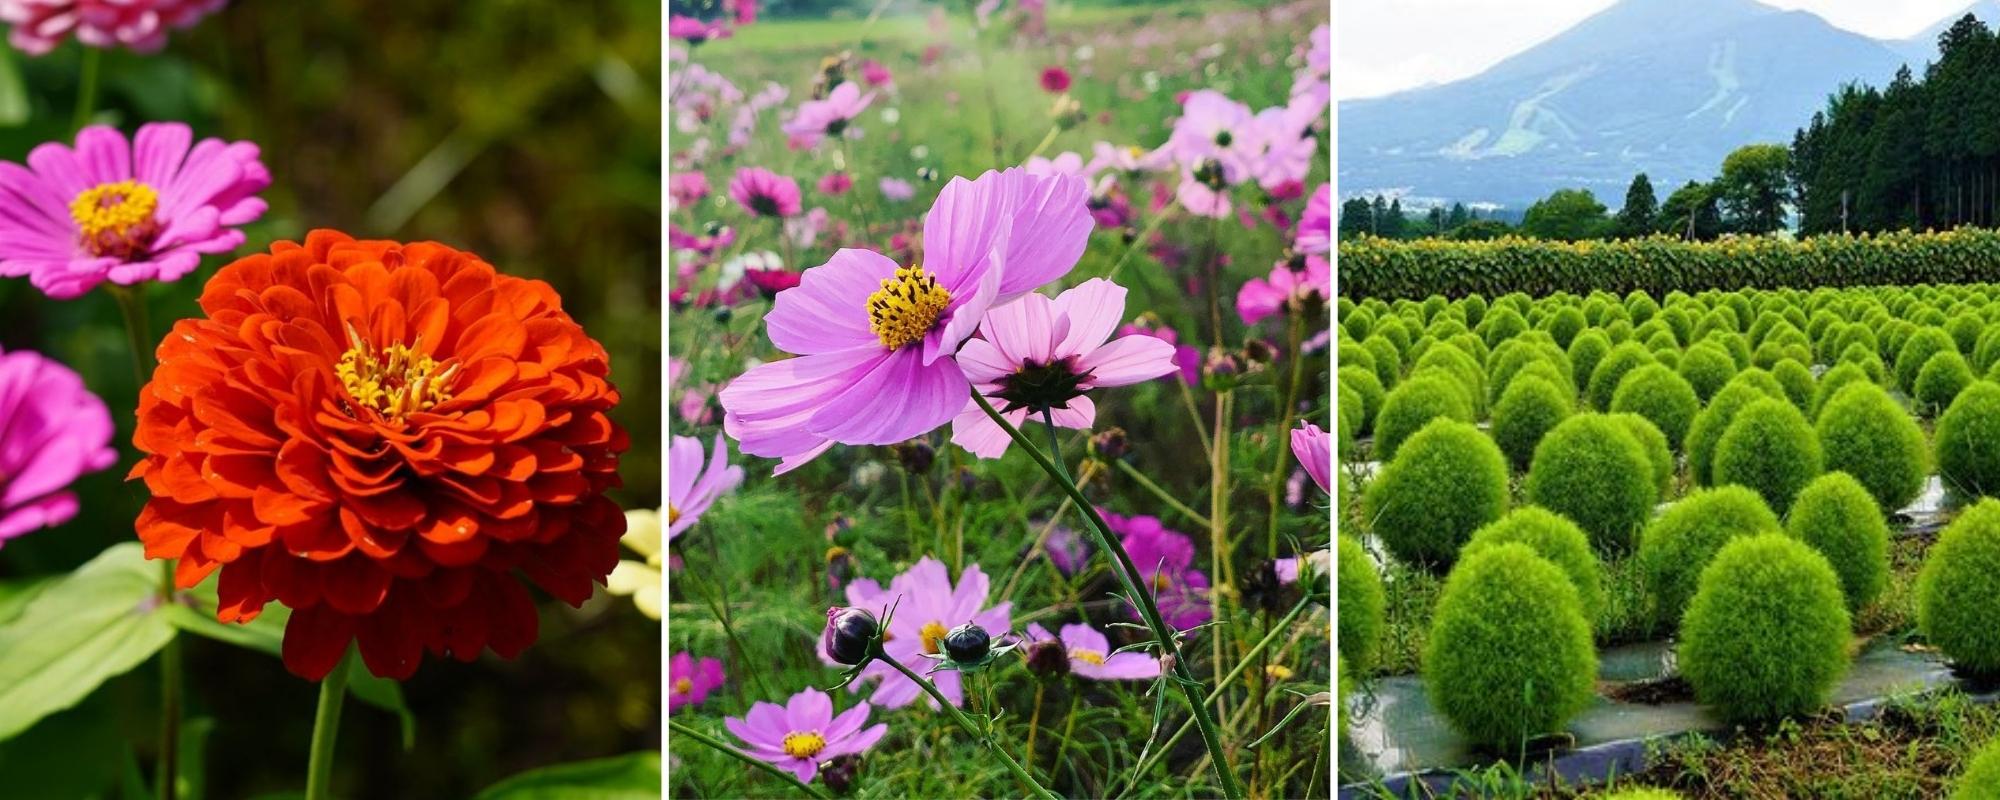 Inawashiro Herb Garden - collage of flowers in september